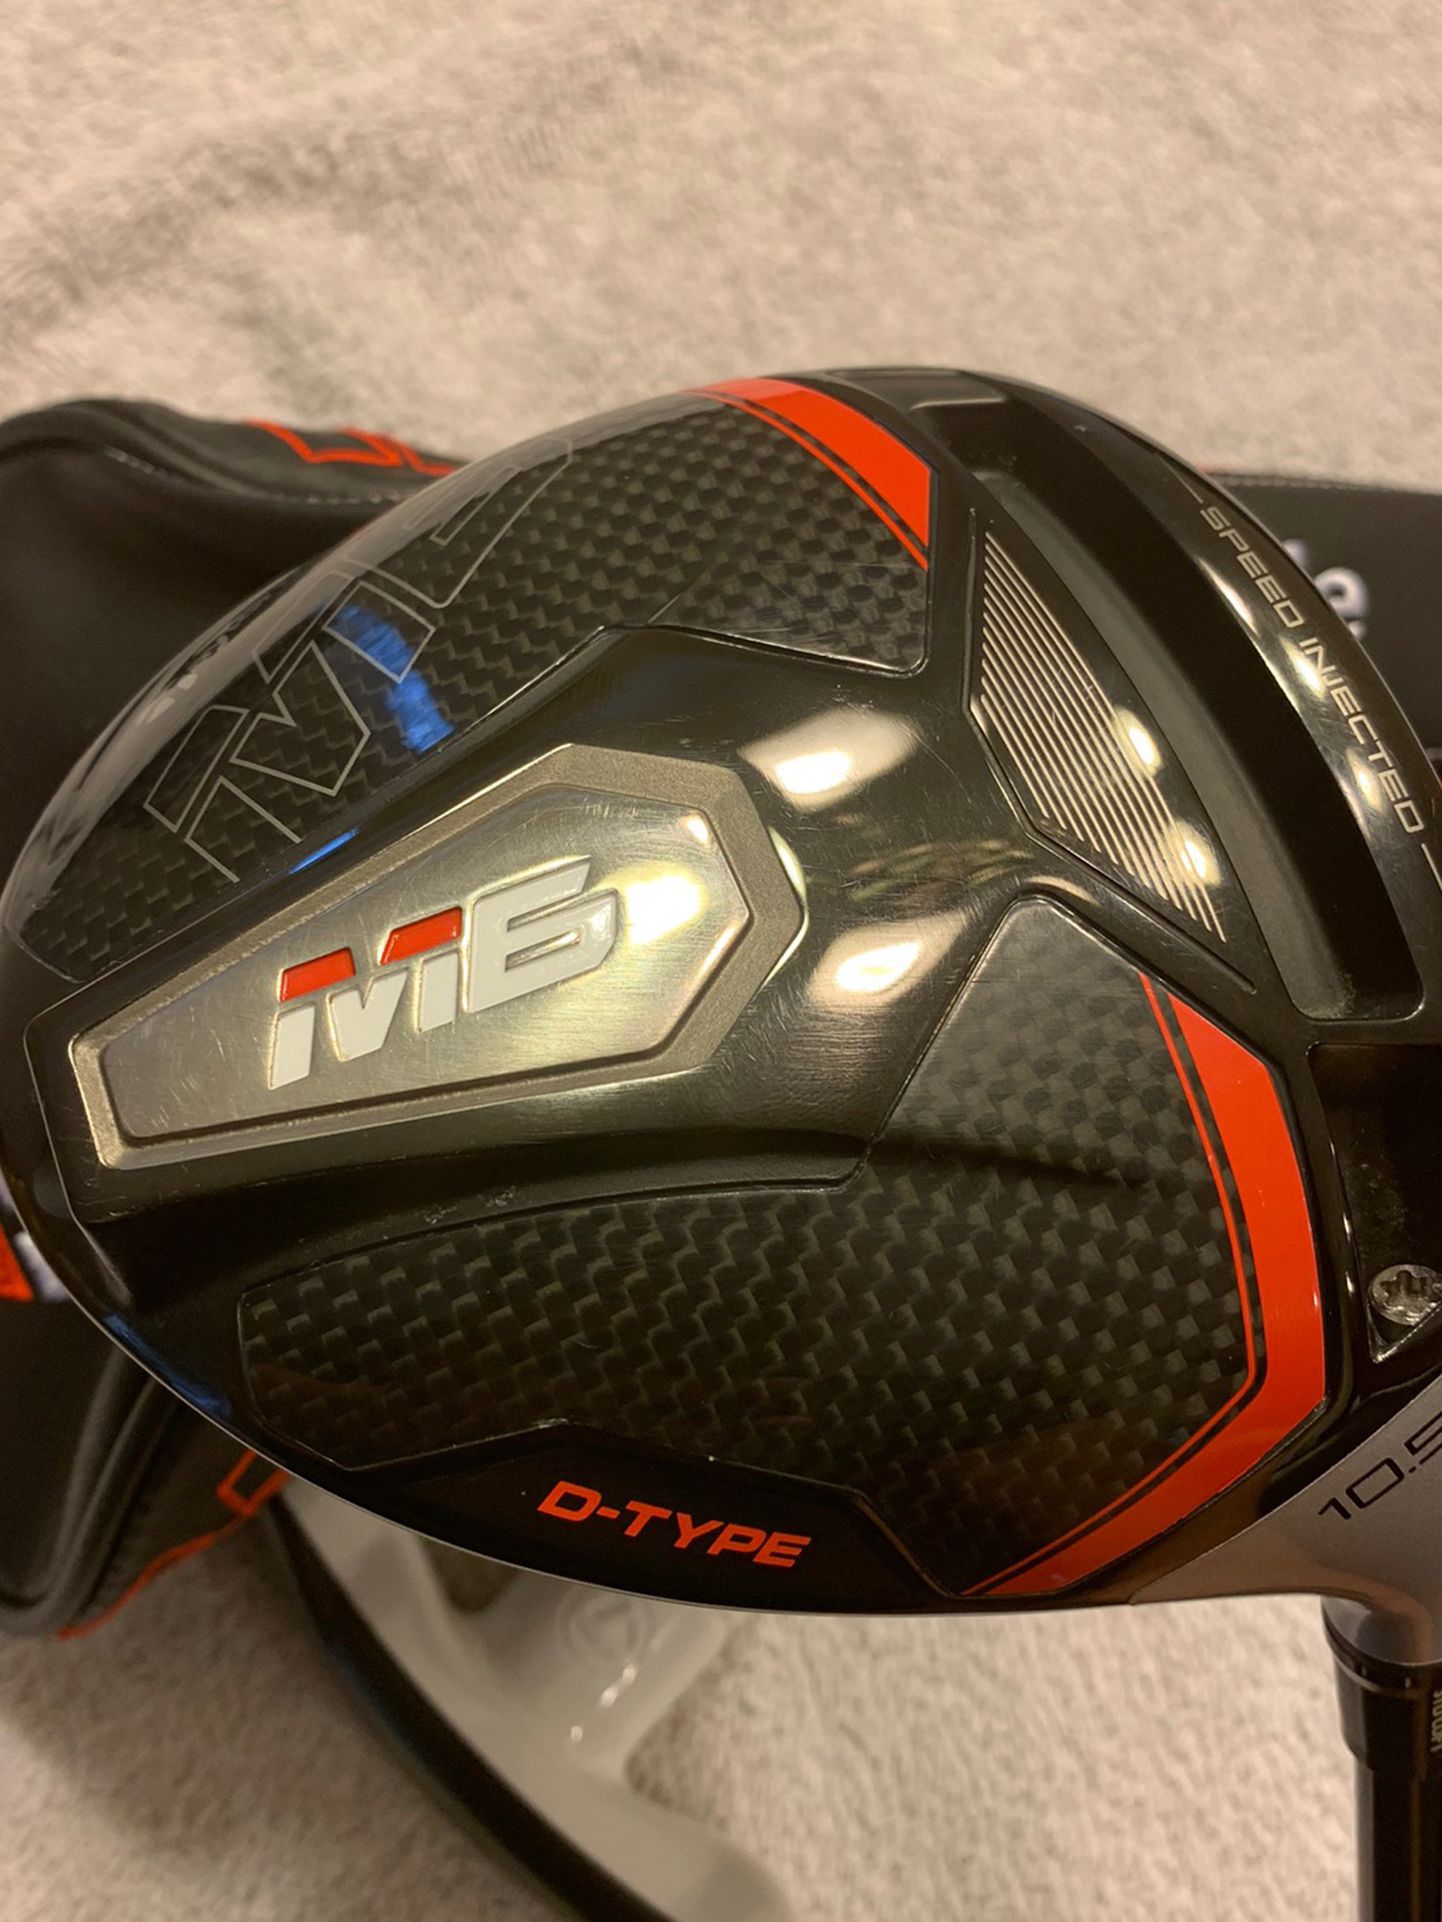 Taylormade M6 10.5* Driver D-Type The Stiff Flex ATMOS Shaft. Excellent Condition